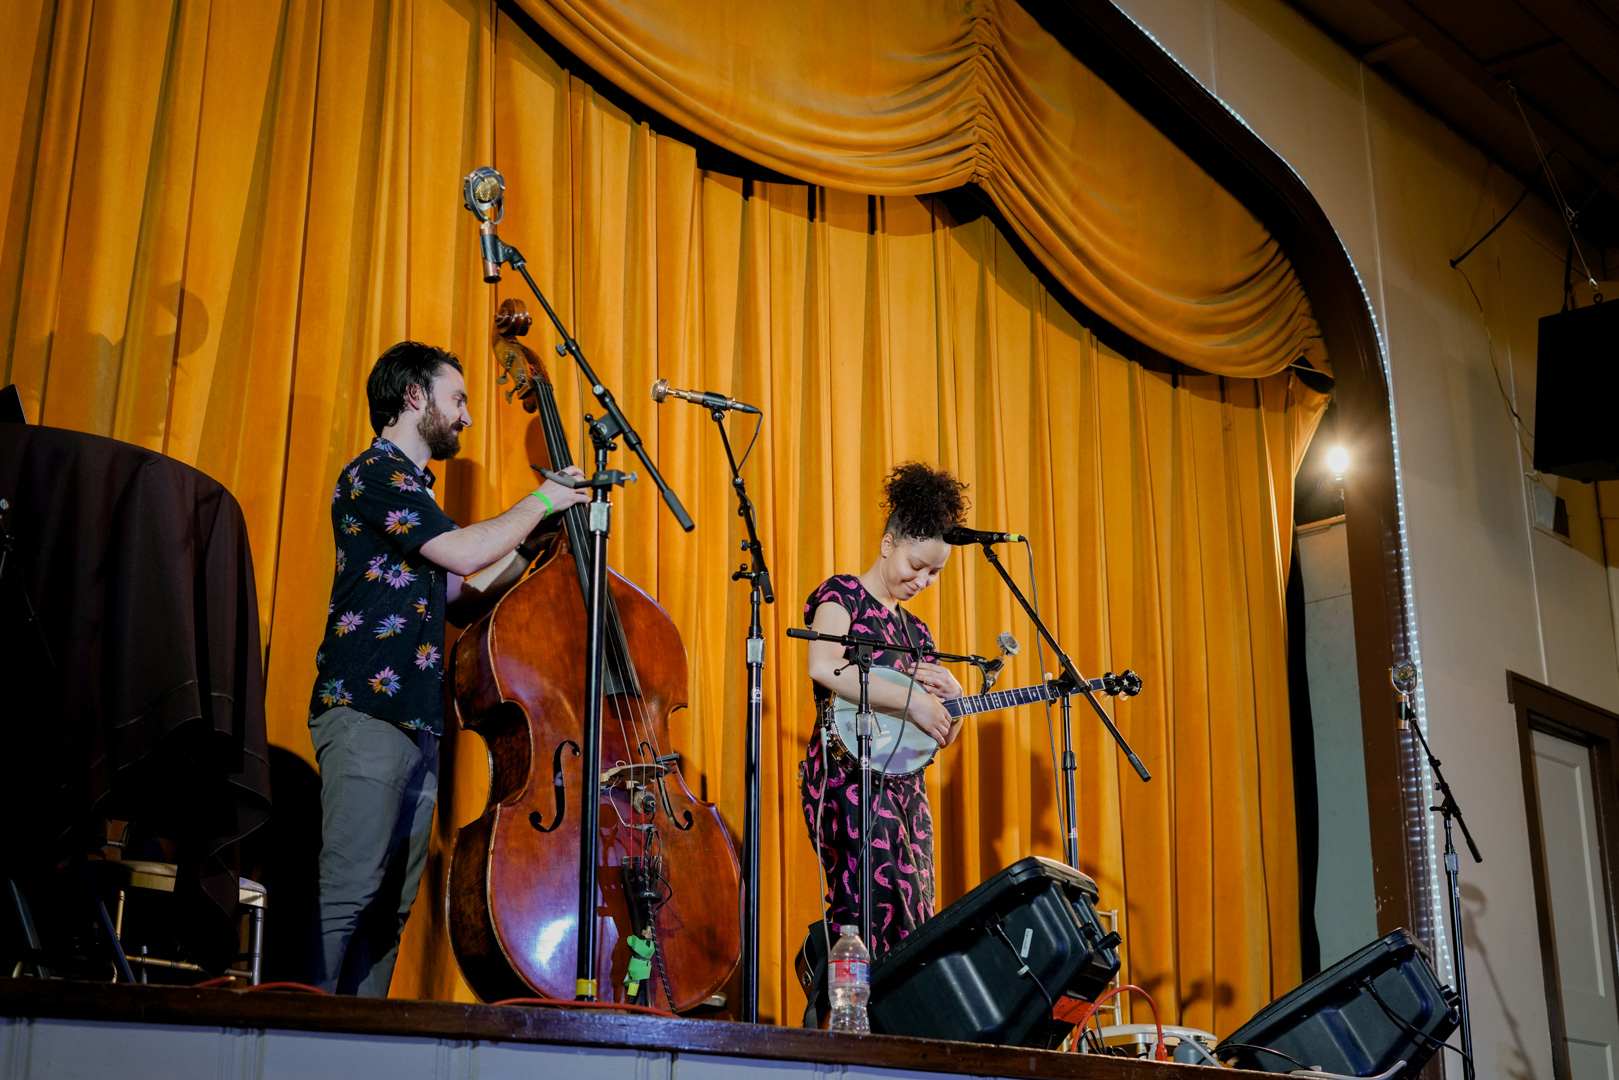 A woman plays banjo and a man plays upright bass